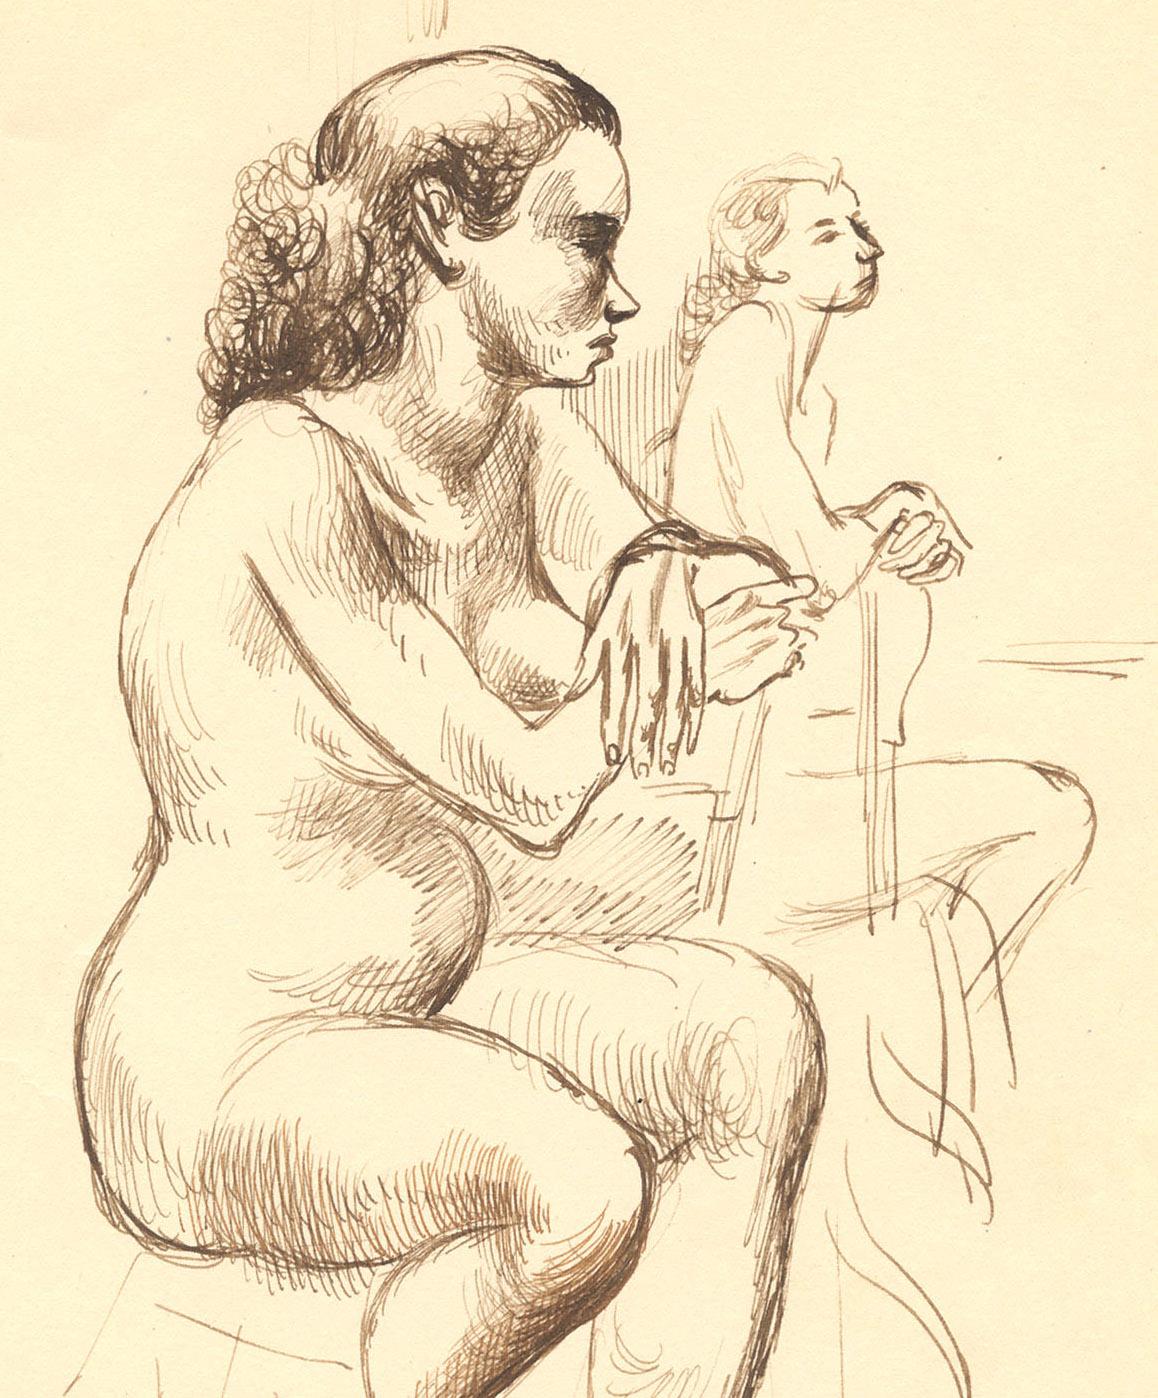 Nude on a Stool
Ink on paper, c. 1970-80
Signed in red ink lower right
Illustrated: Elliott & Wooden, page 232   A copy of this hardbound books accompanies purchase
Condition: Excellent
Image/Sheet size: 11 x  8 1/2 inches
Provenance: Estate of the